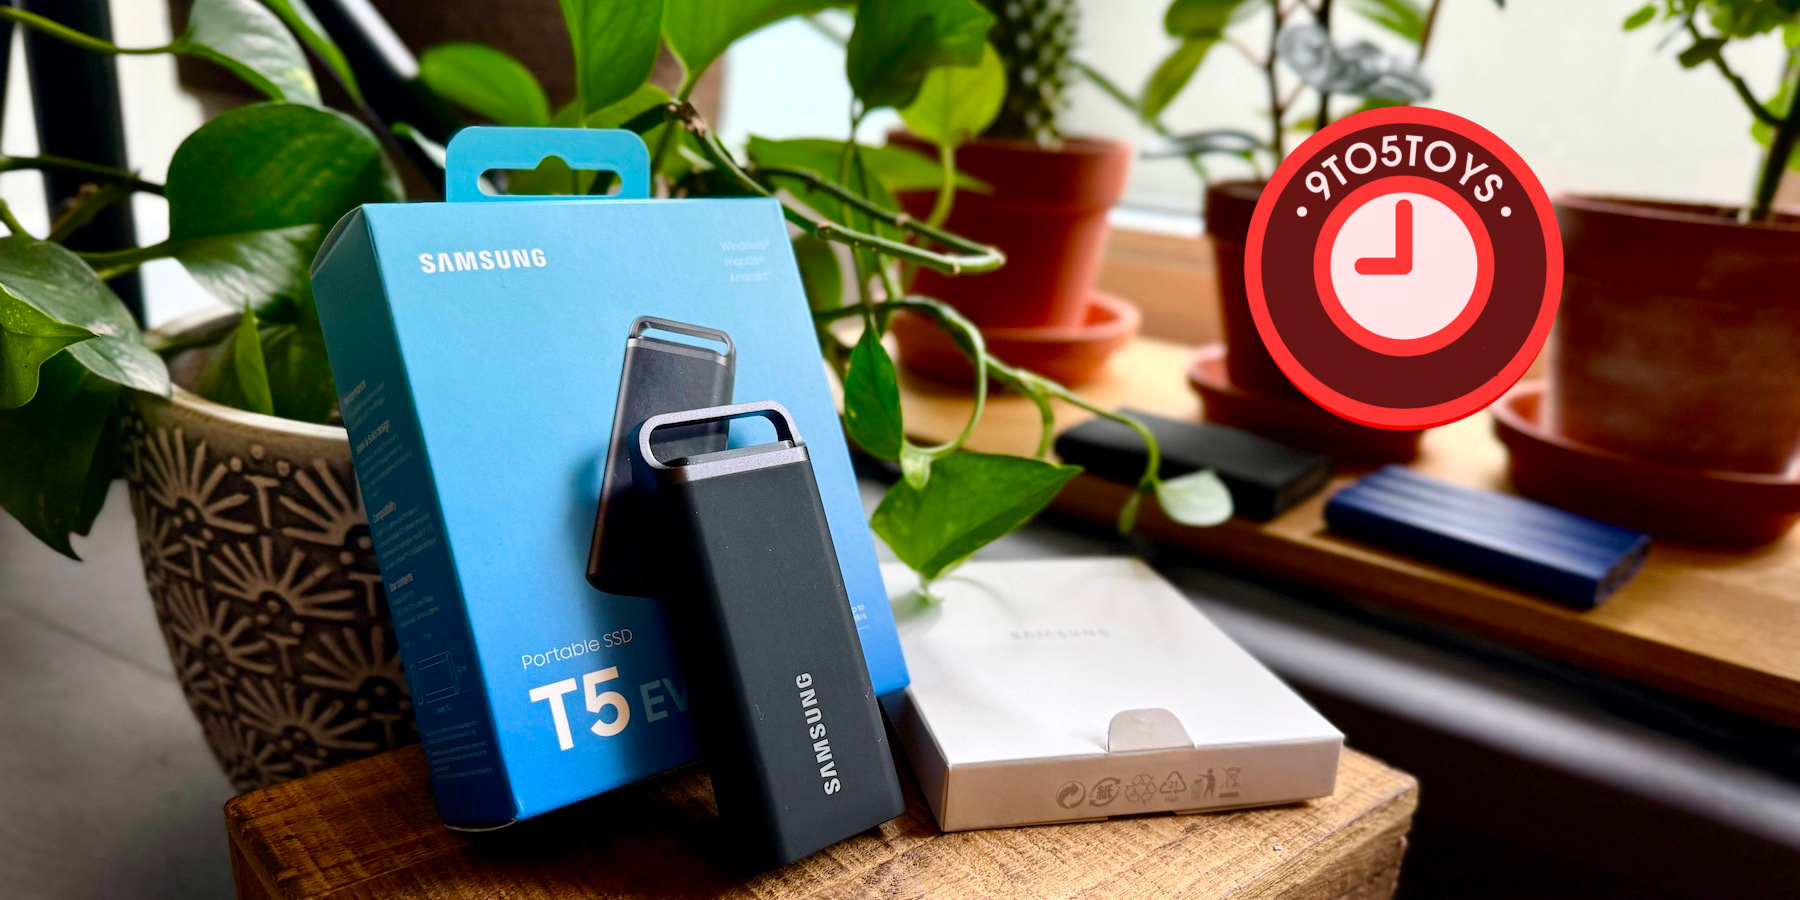 Samsung Portable SSD T5 1TB Review